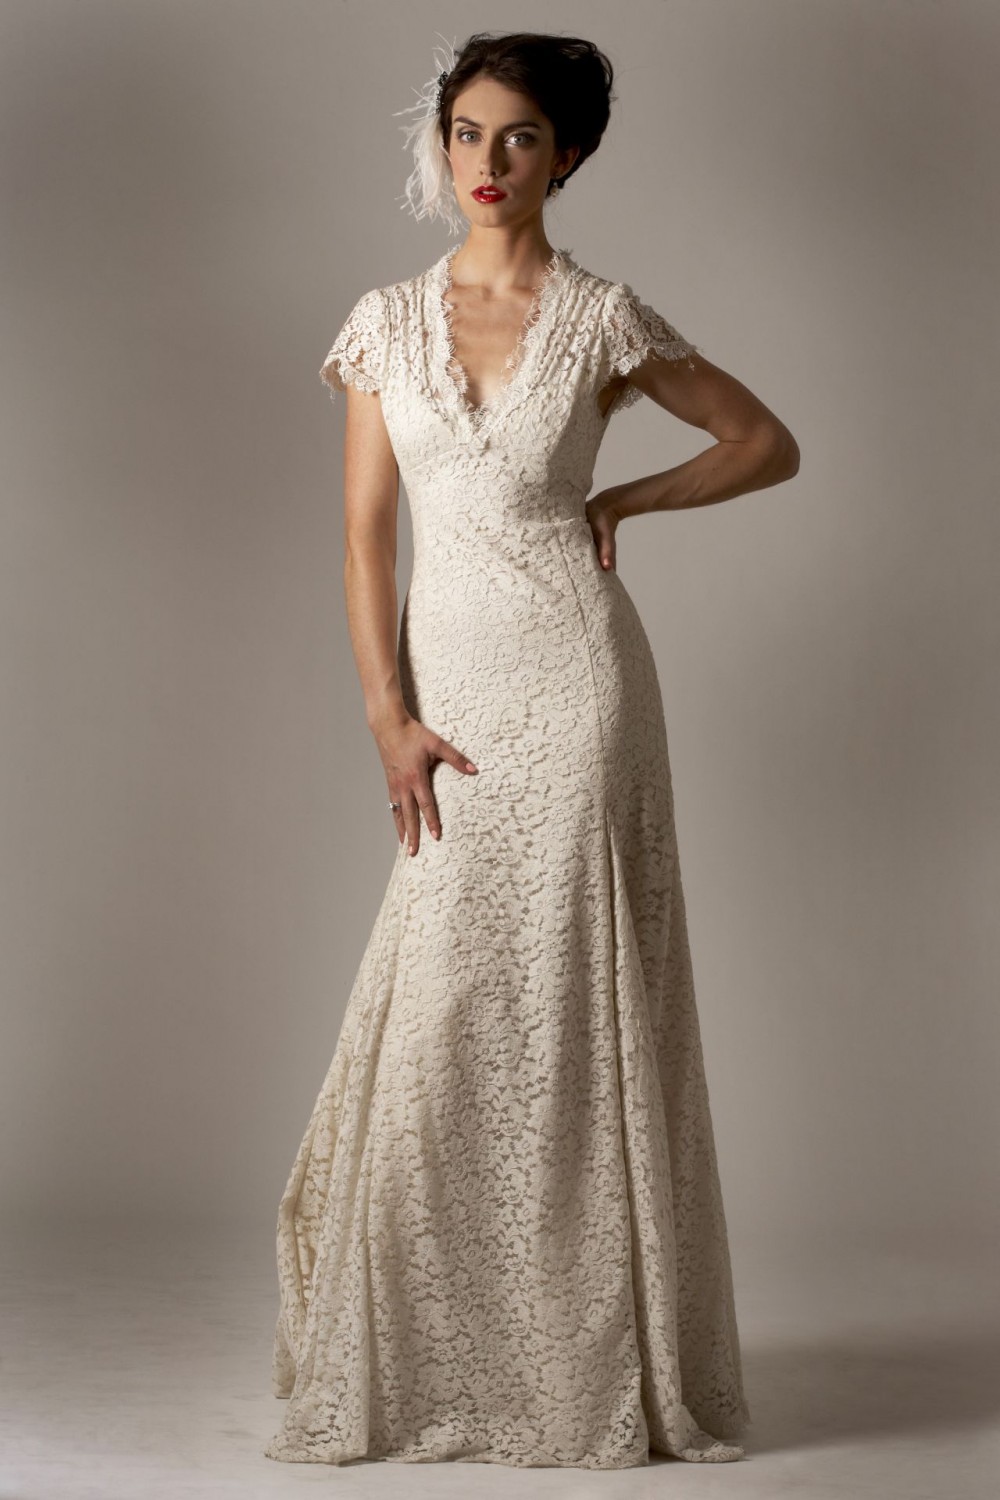  Simple Wedding Dresses For Second Wedding of the decade Don t miss out 